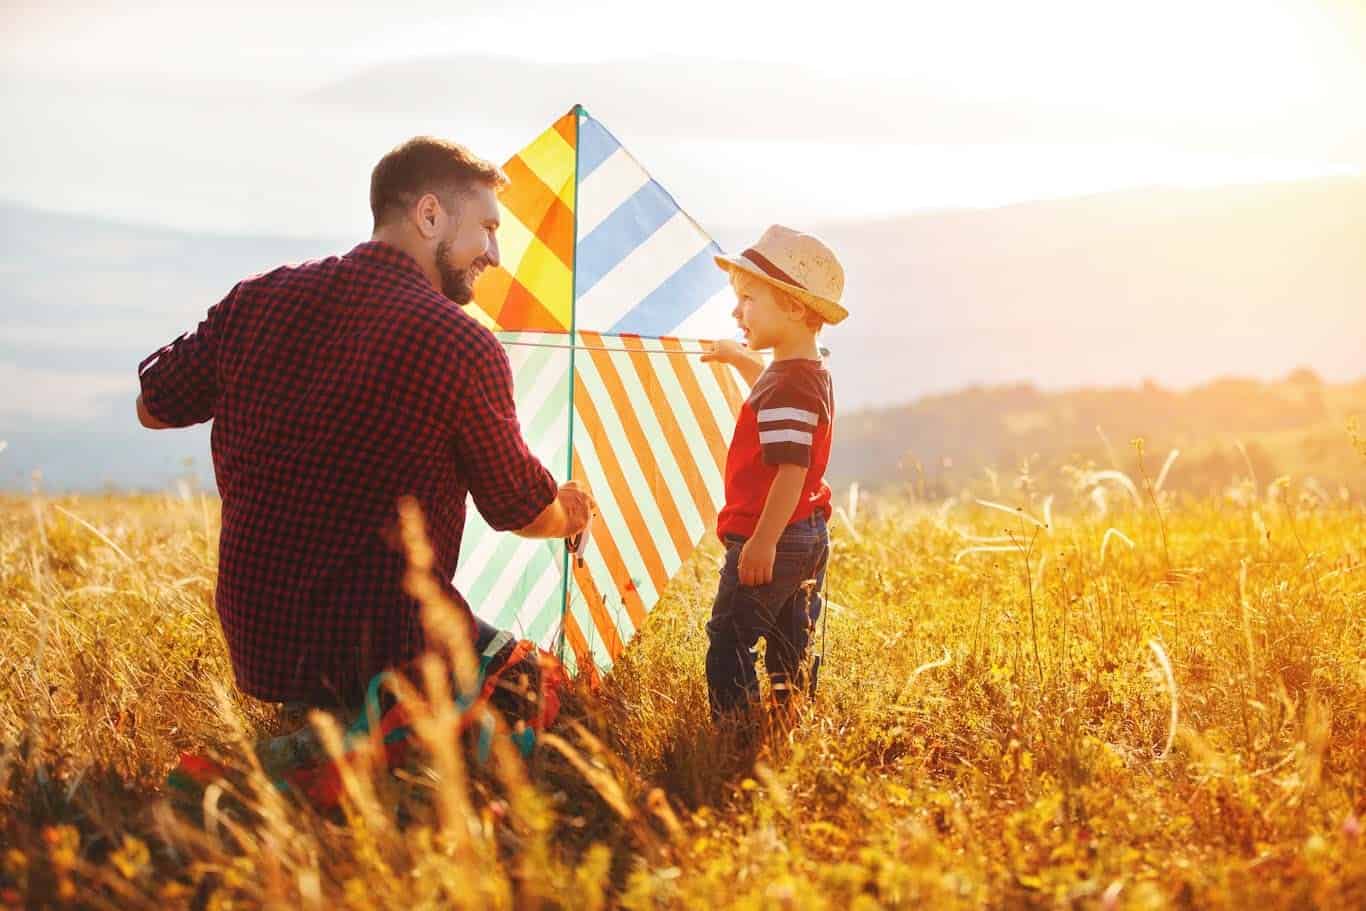 Father and son in field holding a striped kite at sunset